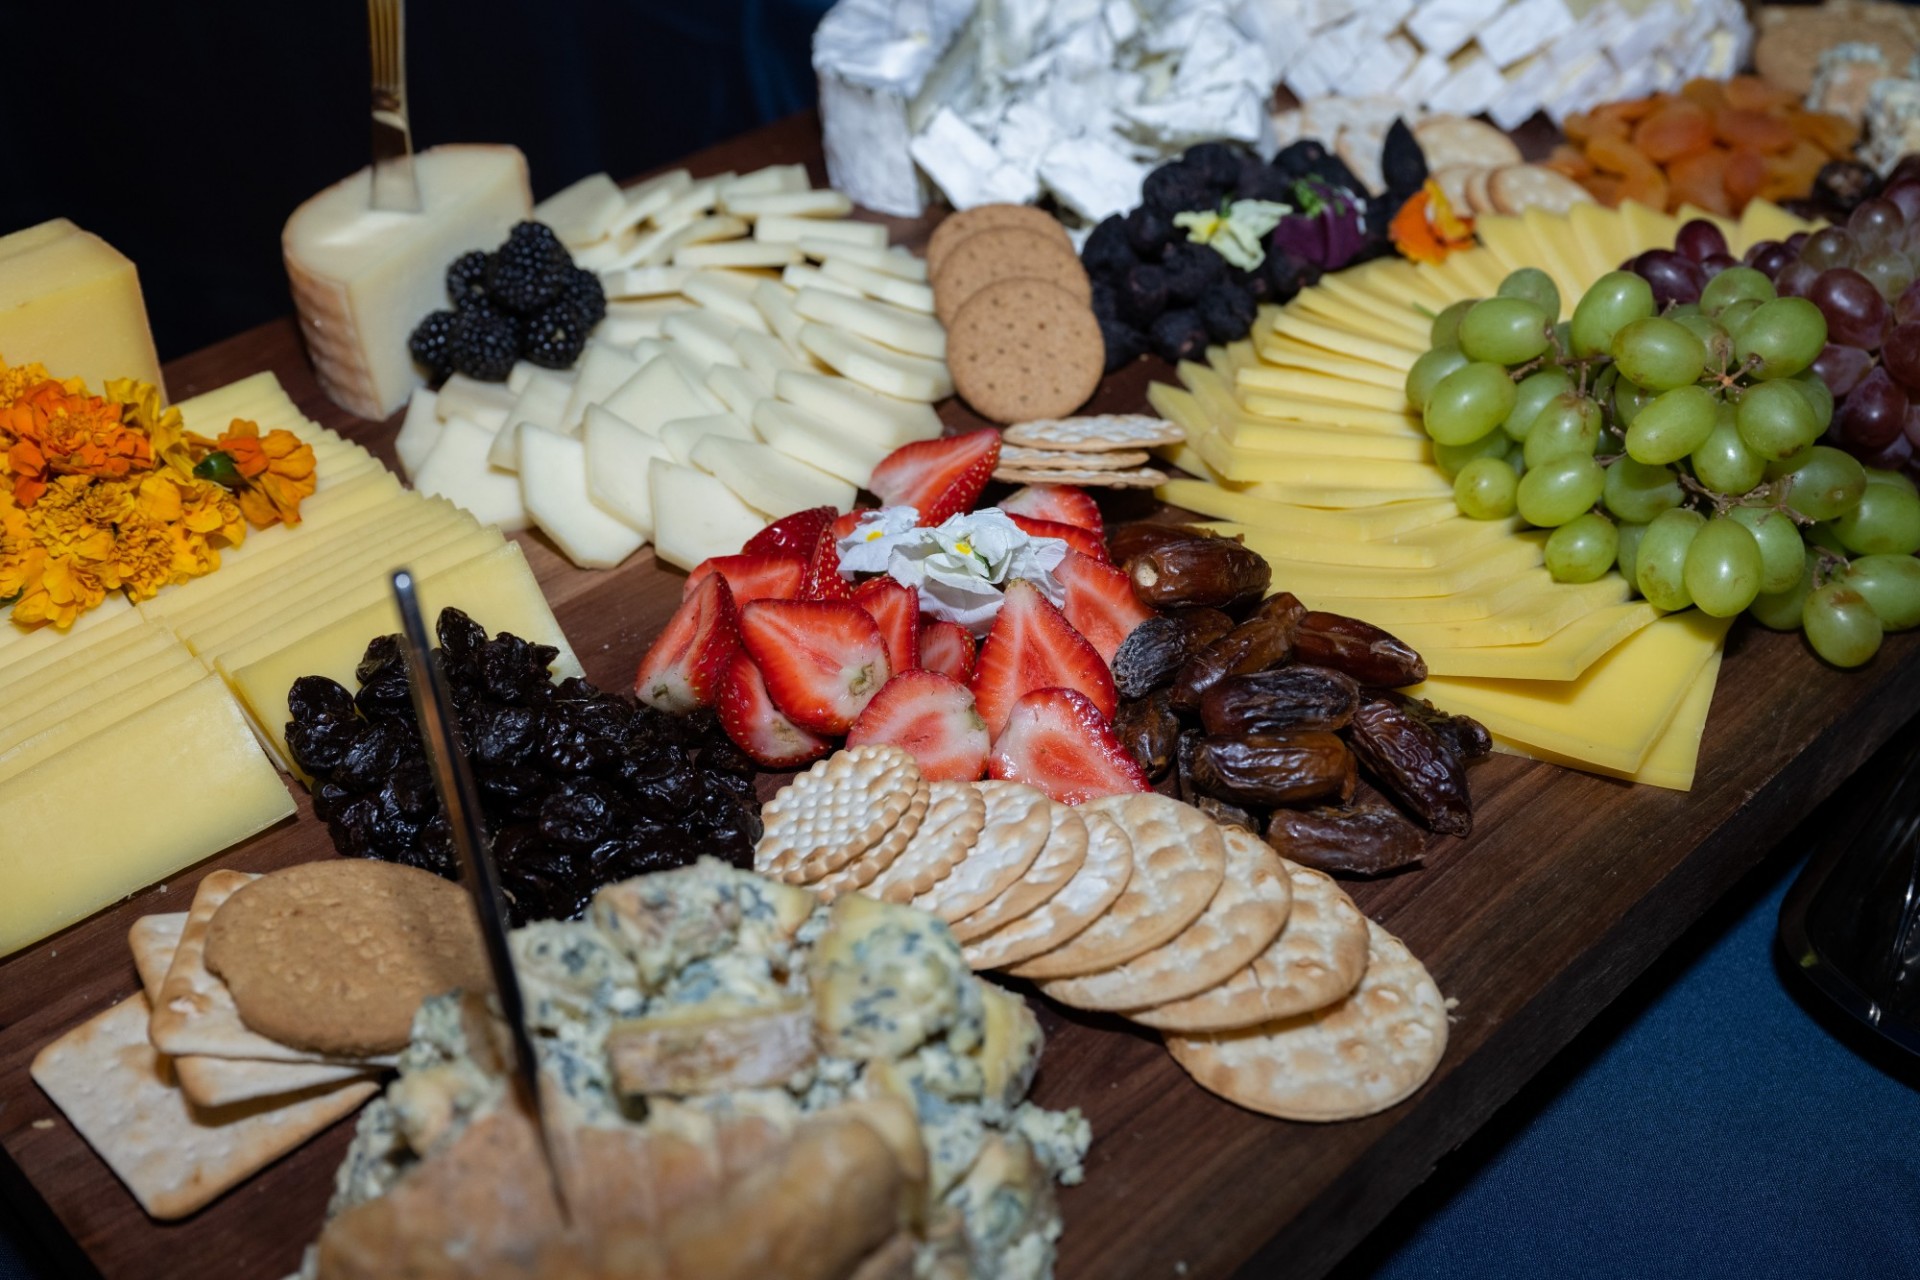 A charcuterie board with assorted cheese, fruit, and breads